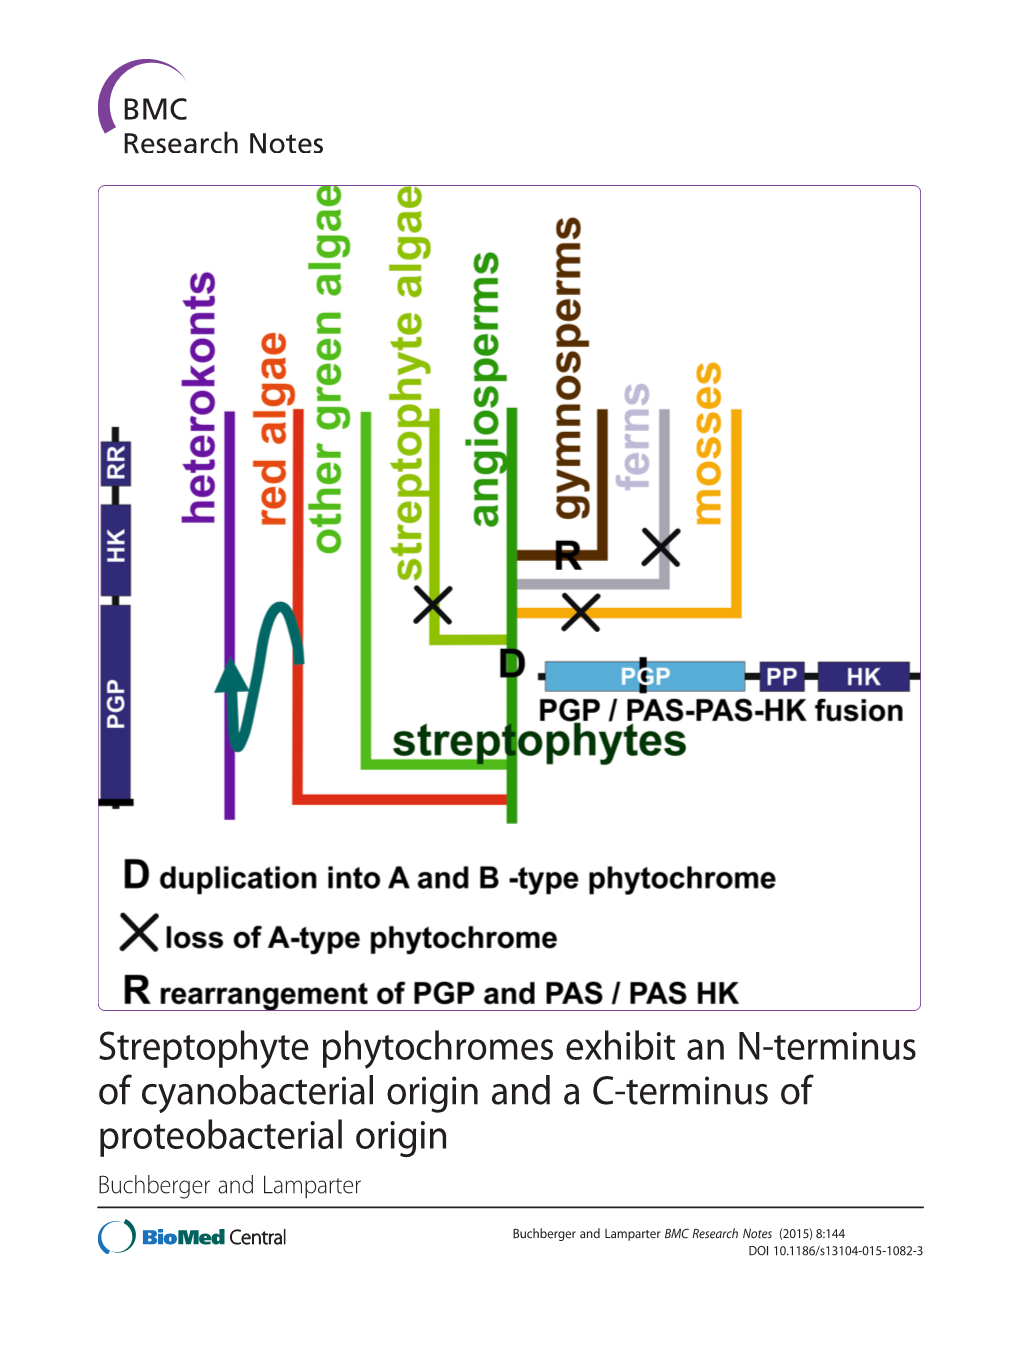 Streptophyte Phytochromes Exhibit an N-Terminus of Cyanobacterial Origin and a C-Terminus of Proteobacterial Origin Buchberger and Lamparter